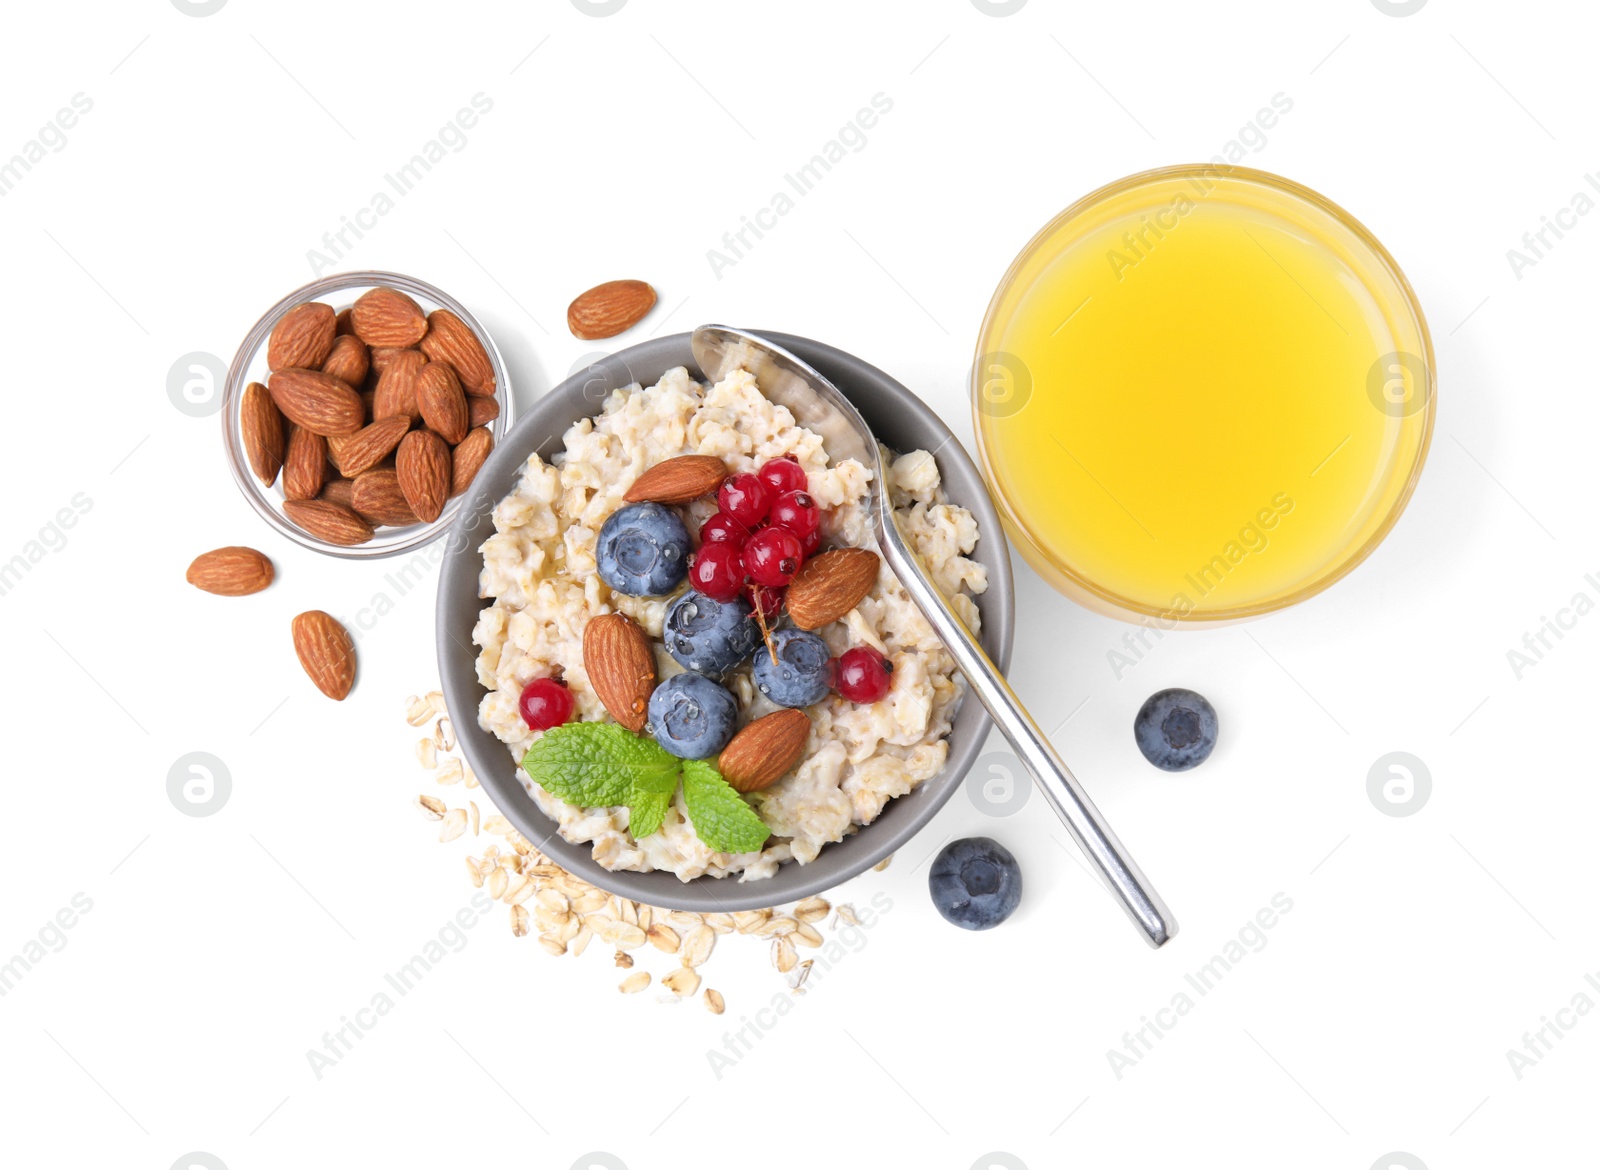 Photo of Oatmeal served with berries, almonds and honey on white background, top view